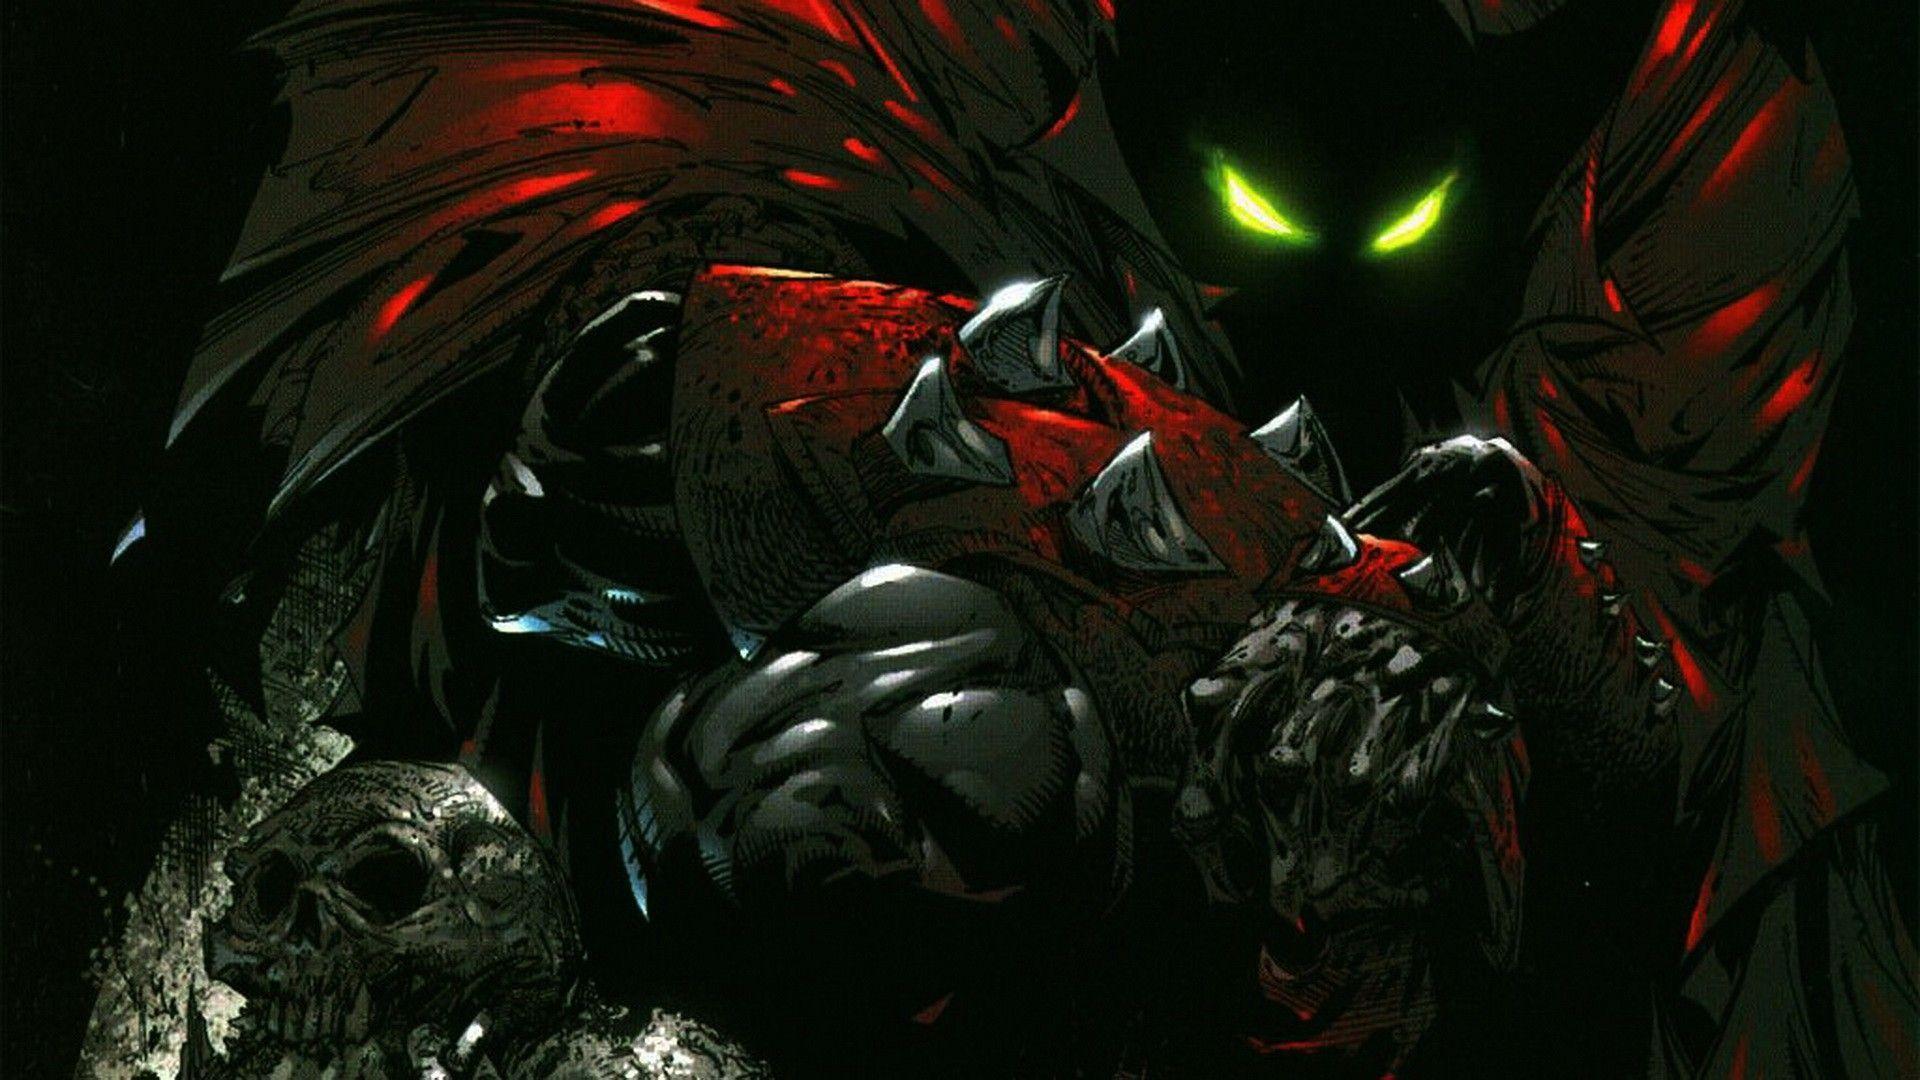 image For > Spawn Wallpaper